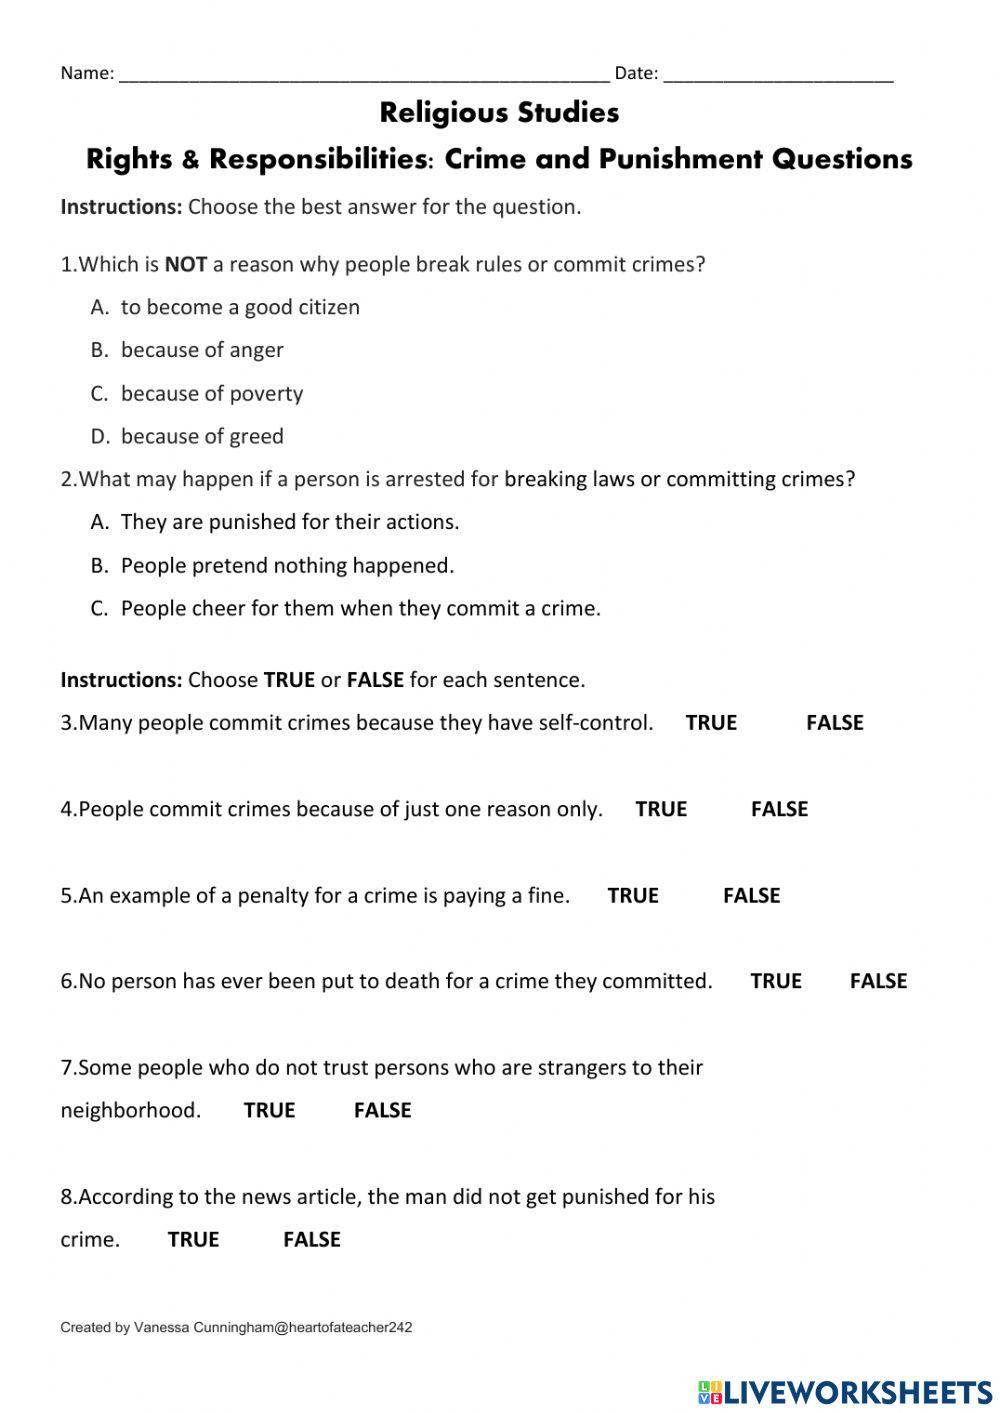 Rights and Responsibilities:Crime and Punishment Worksheet with Notes